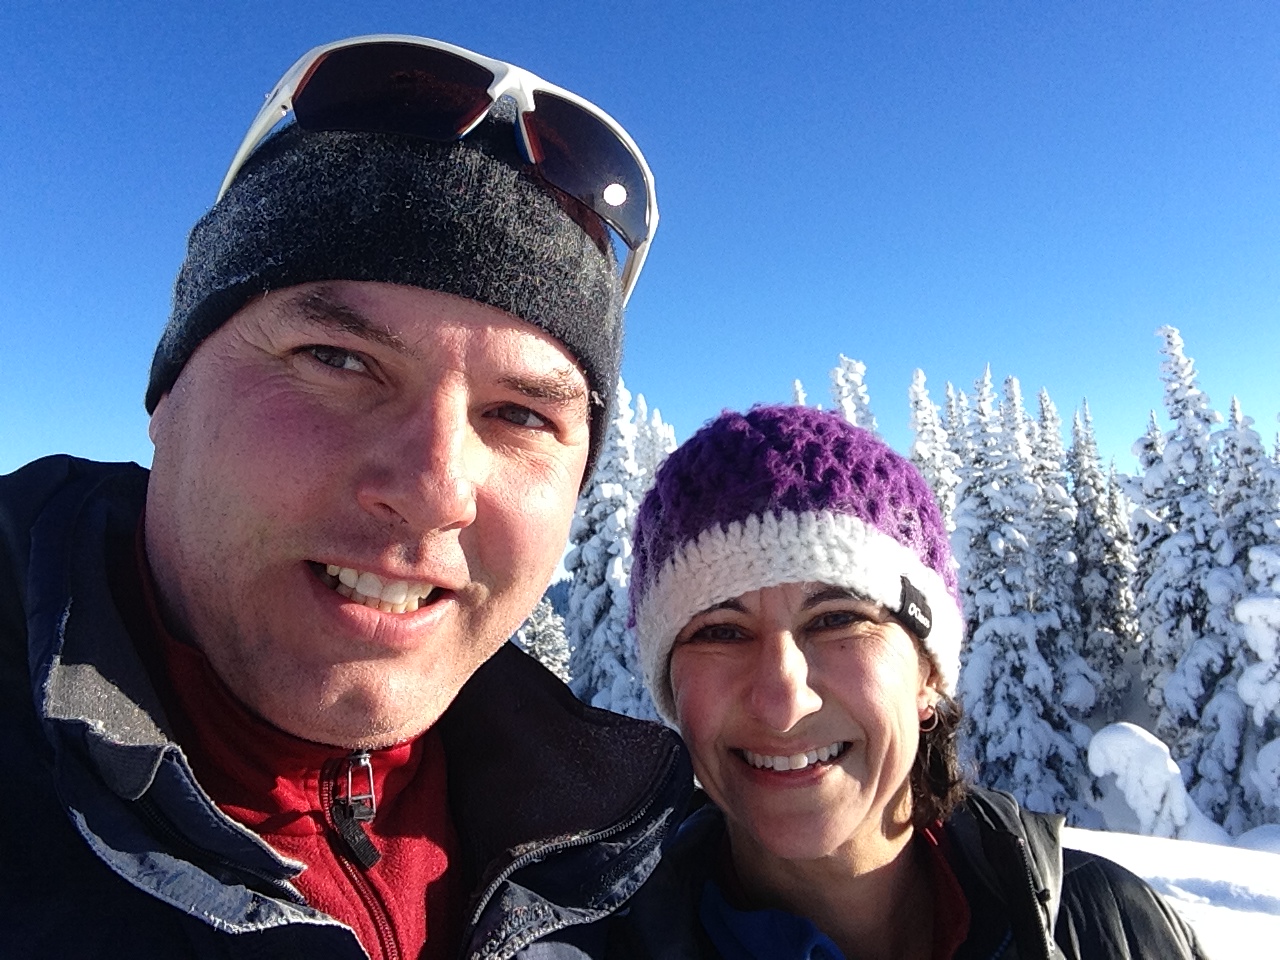 Man and woman wearing winter hats and sunglasses, hiking in snow with trees behind them.